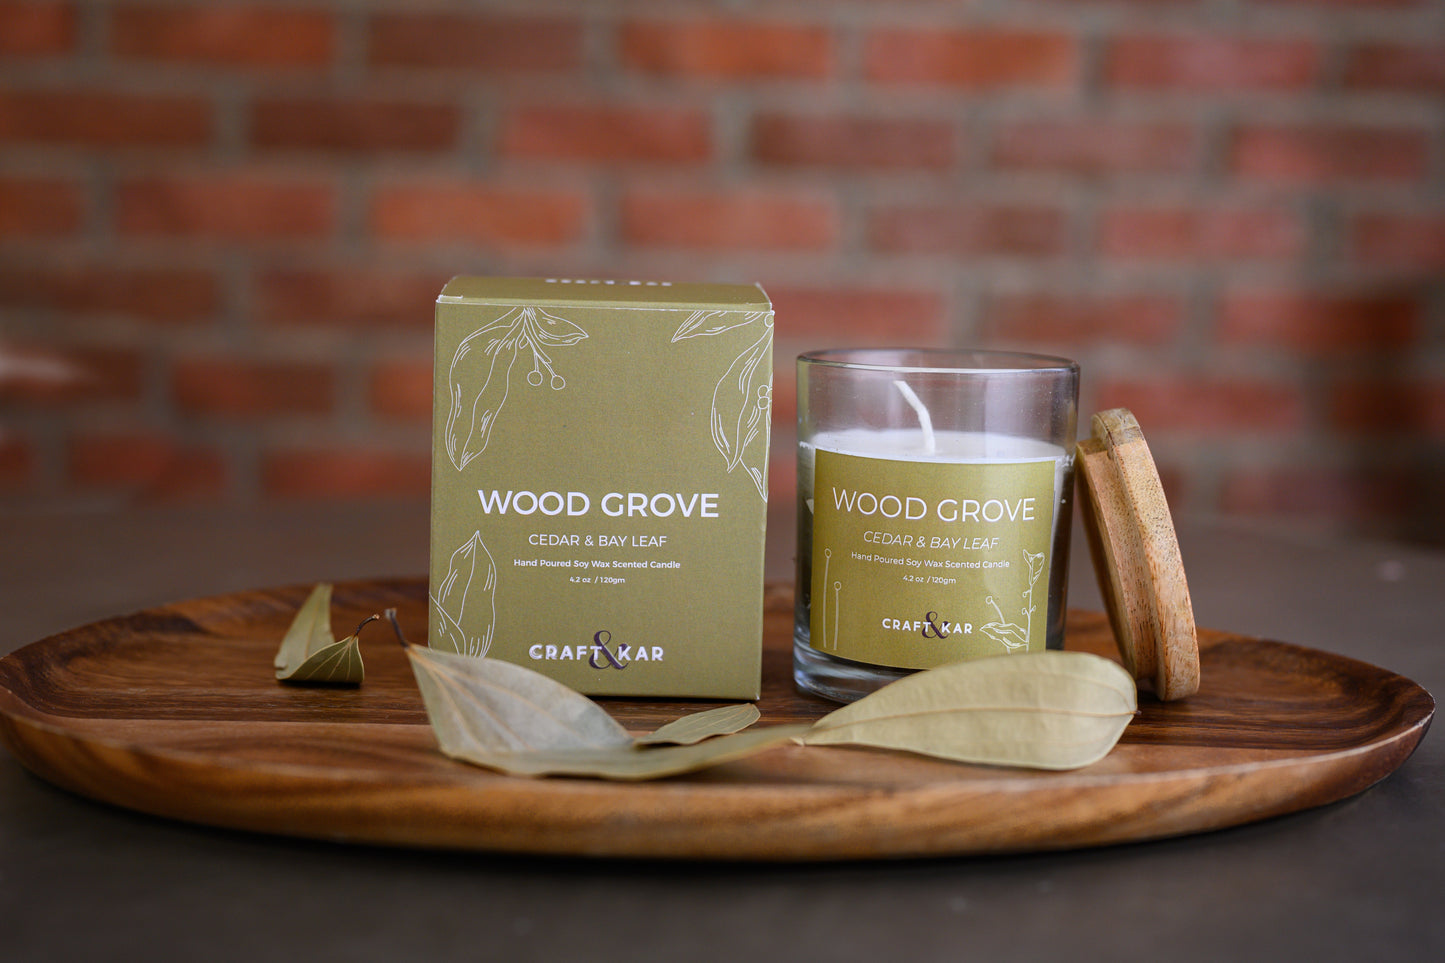 WOOD GROVE SOY WAX SCENTED CANDLE